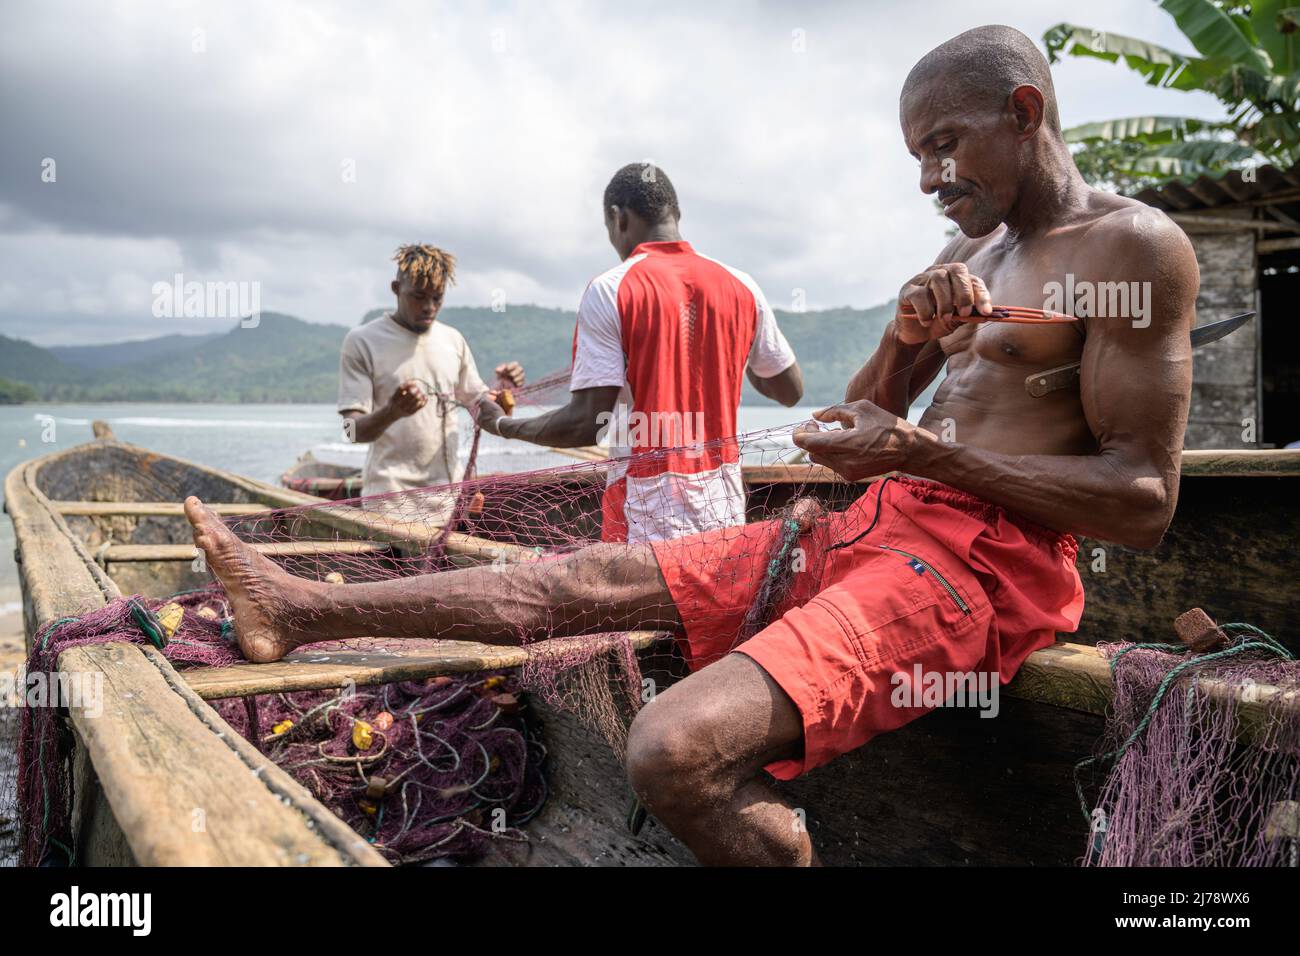 Fishermen repairing the fishing nets on the canoe before going out to fish. Stock Photo